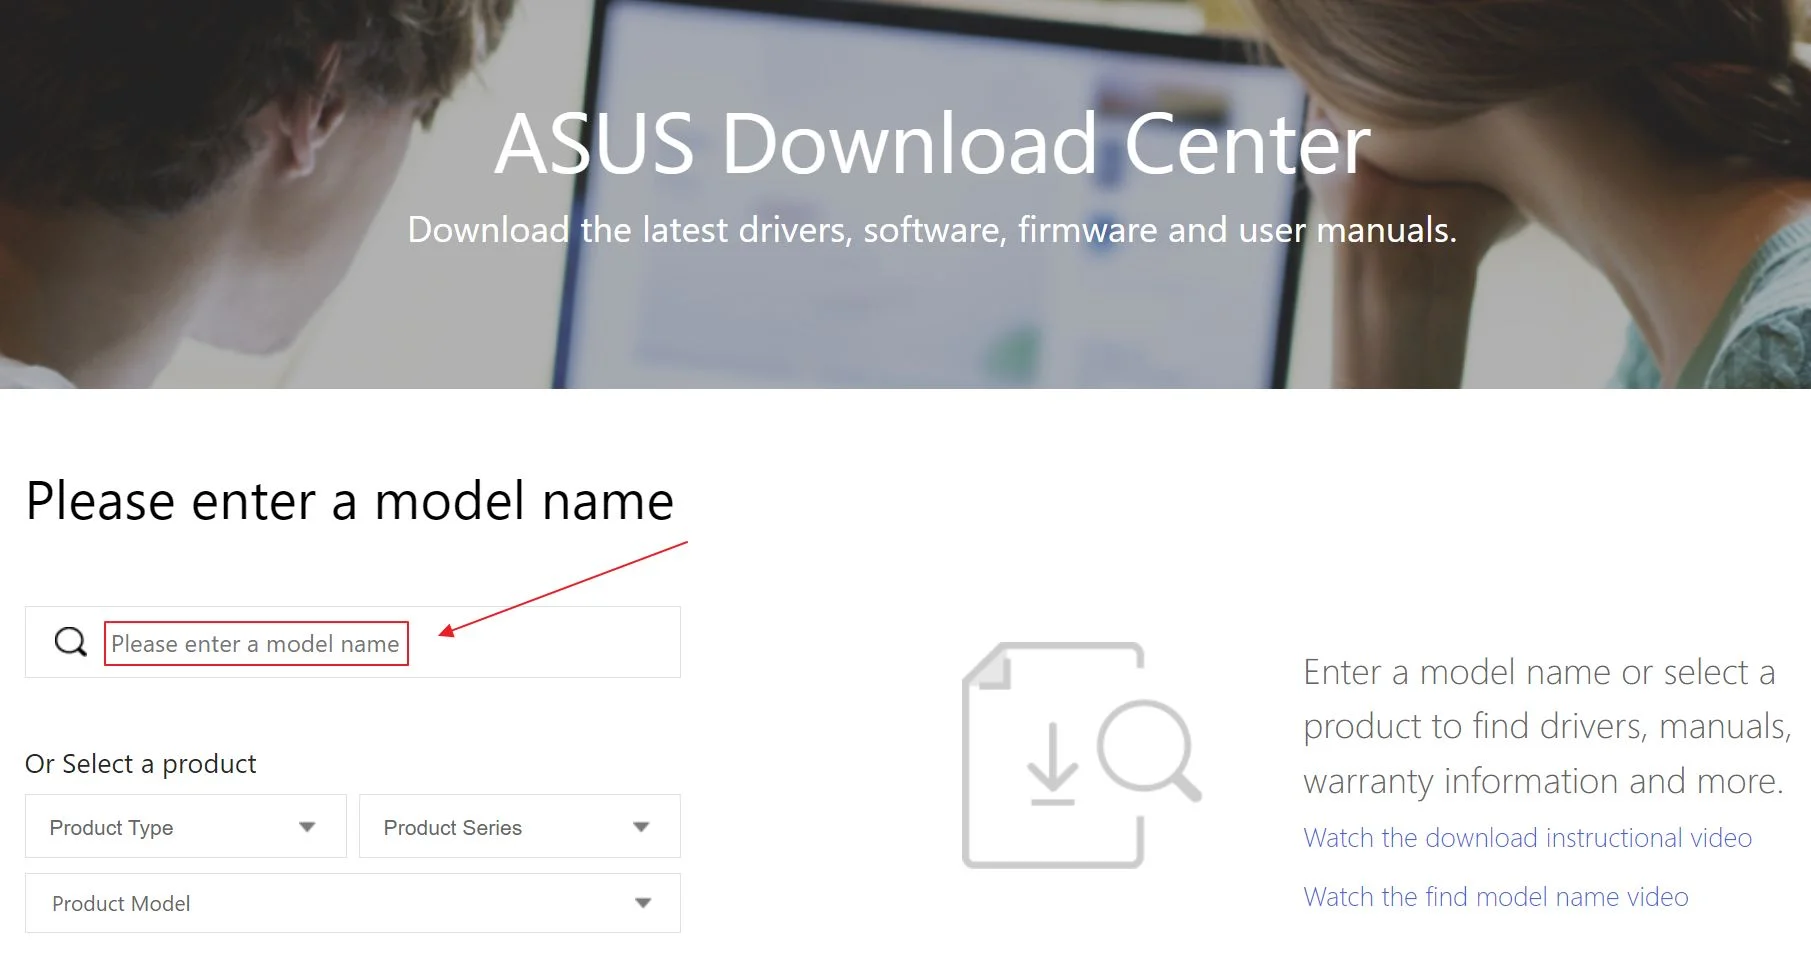 asus download center support page